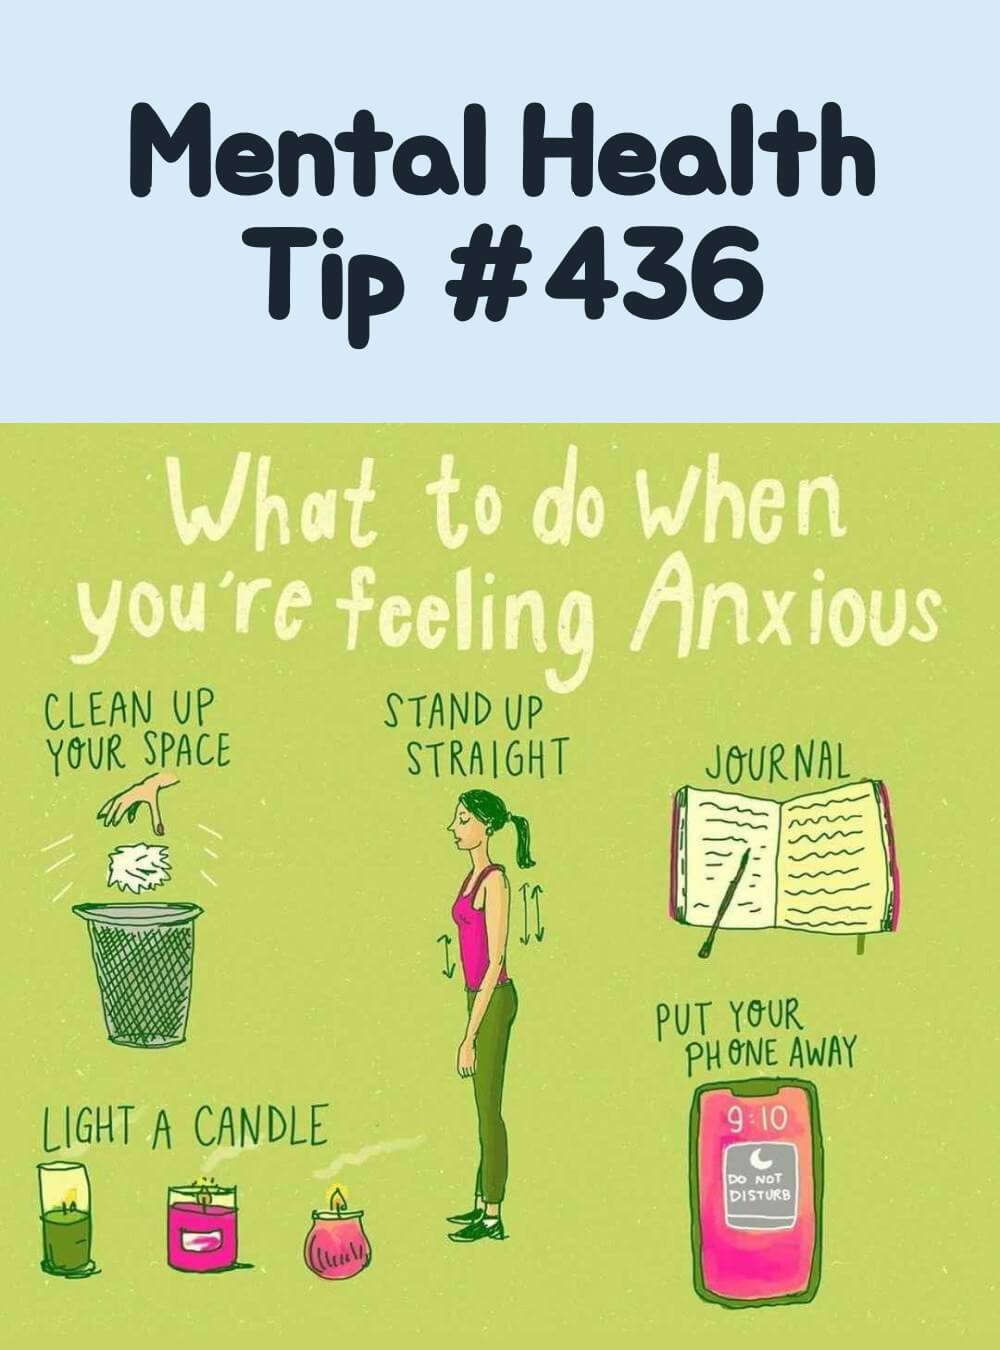 Emotional Well-being Infographic | Mental Health Tip #436